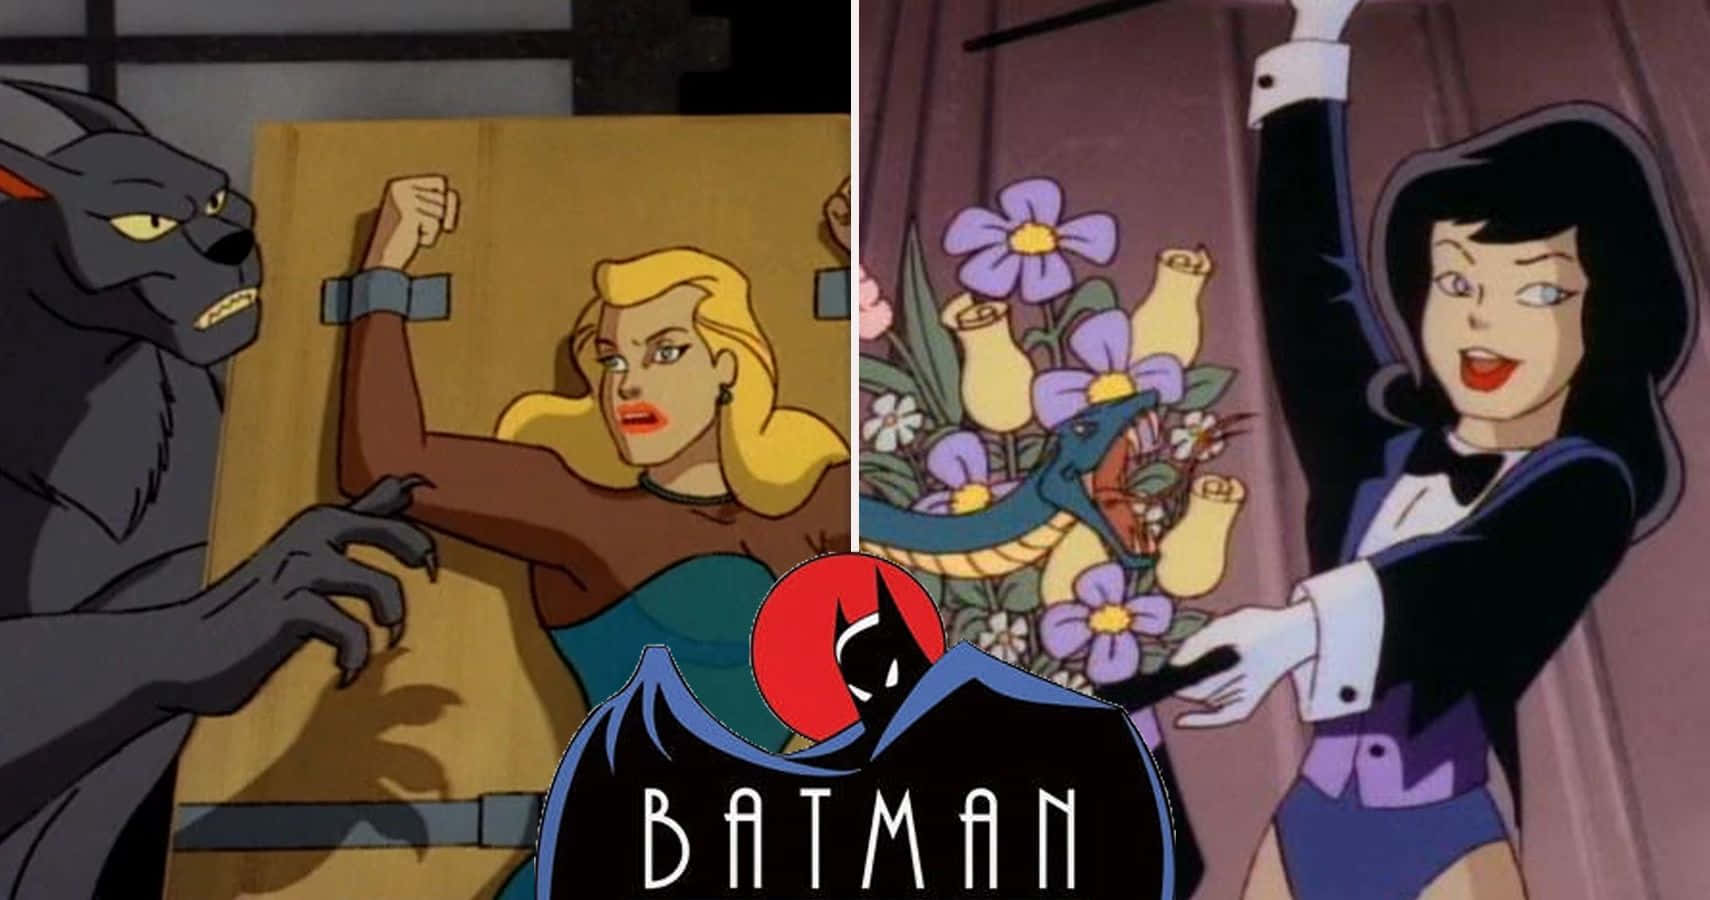 Batman and Robin in action during Batman Animated Adventures Wallpaper